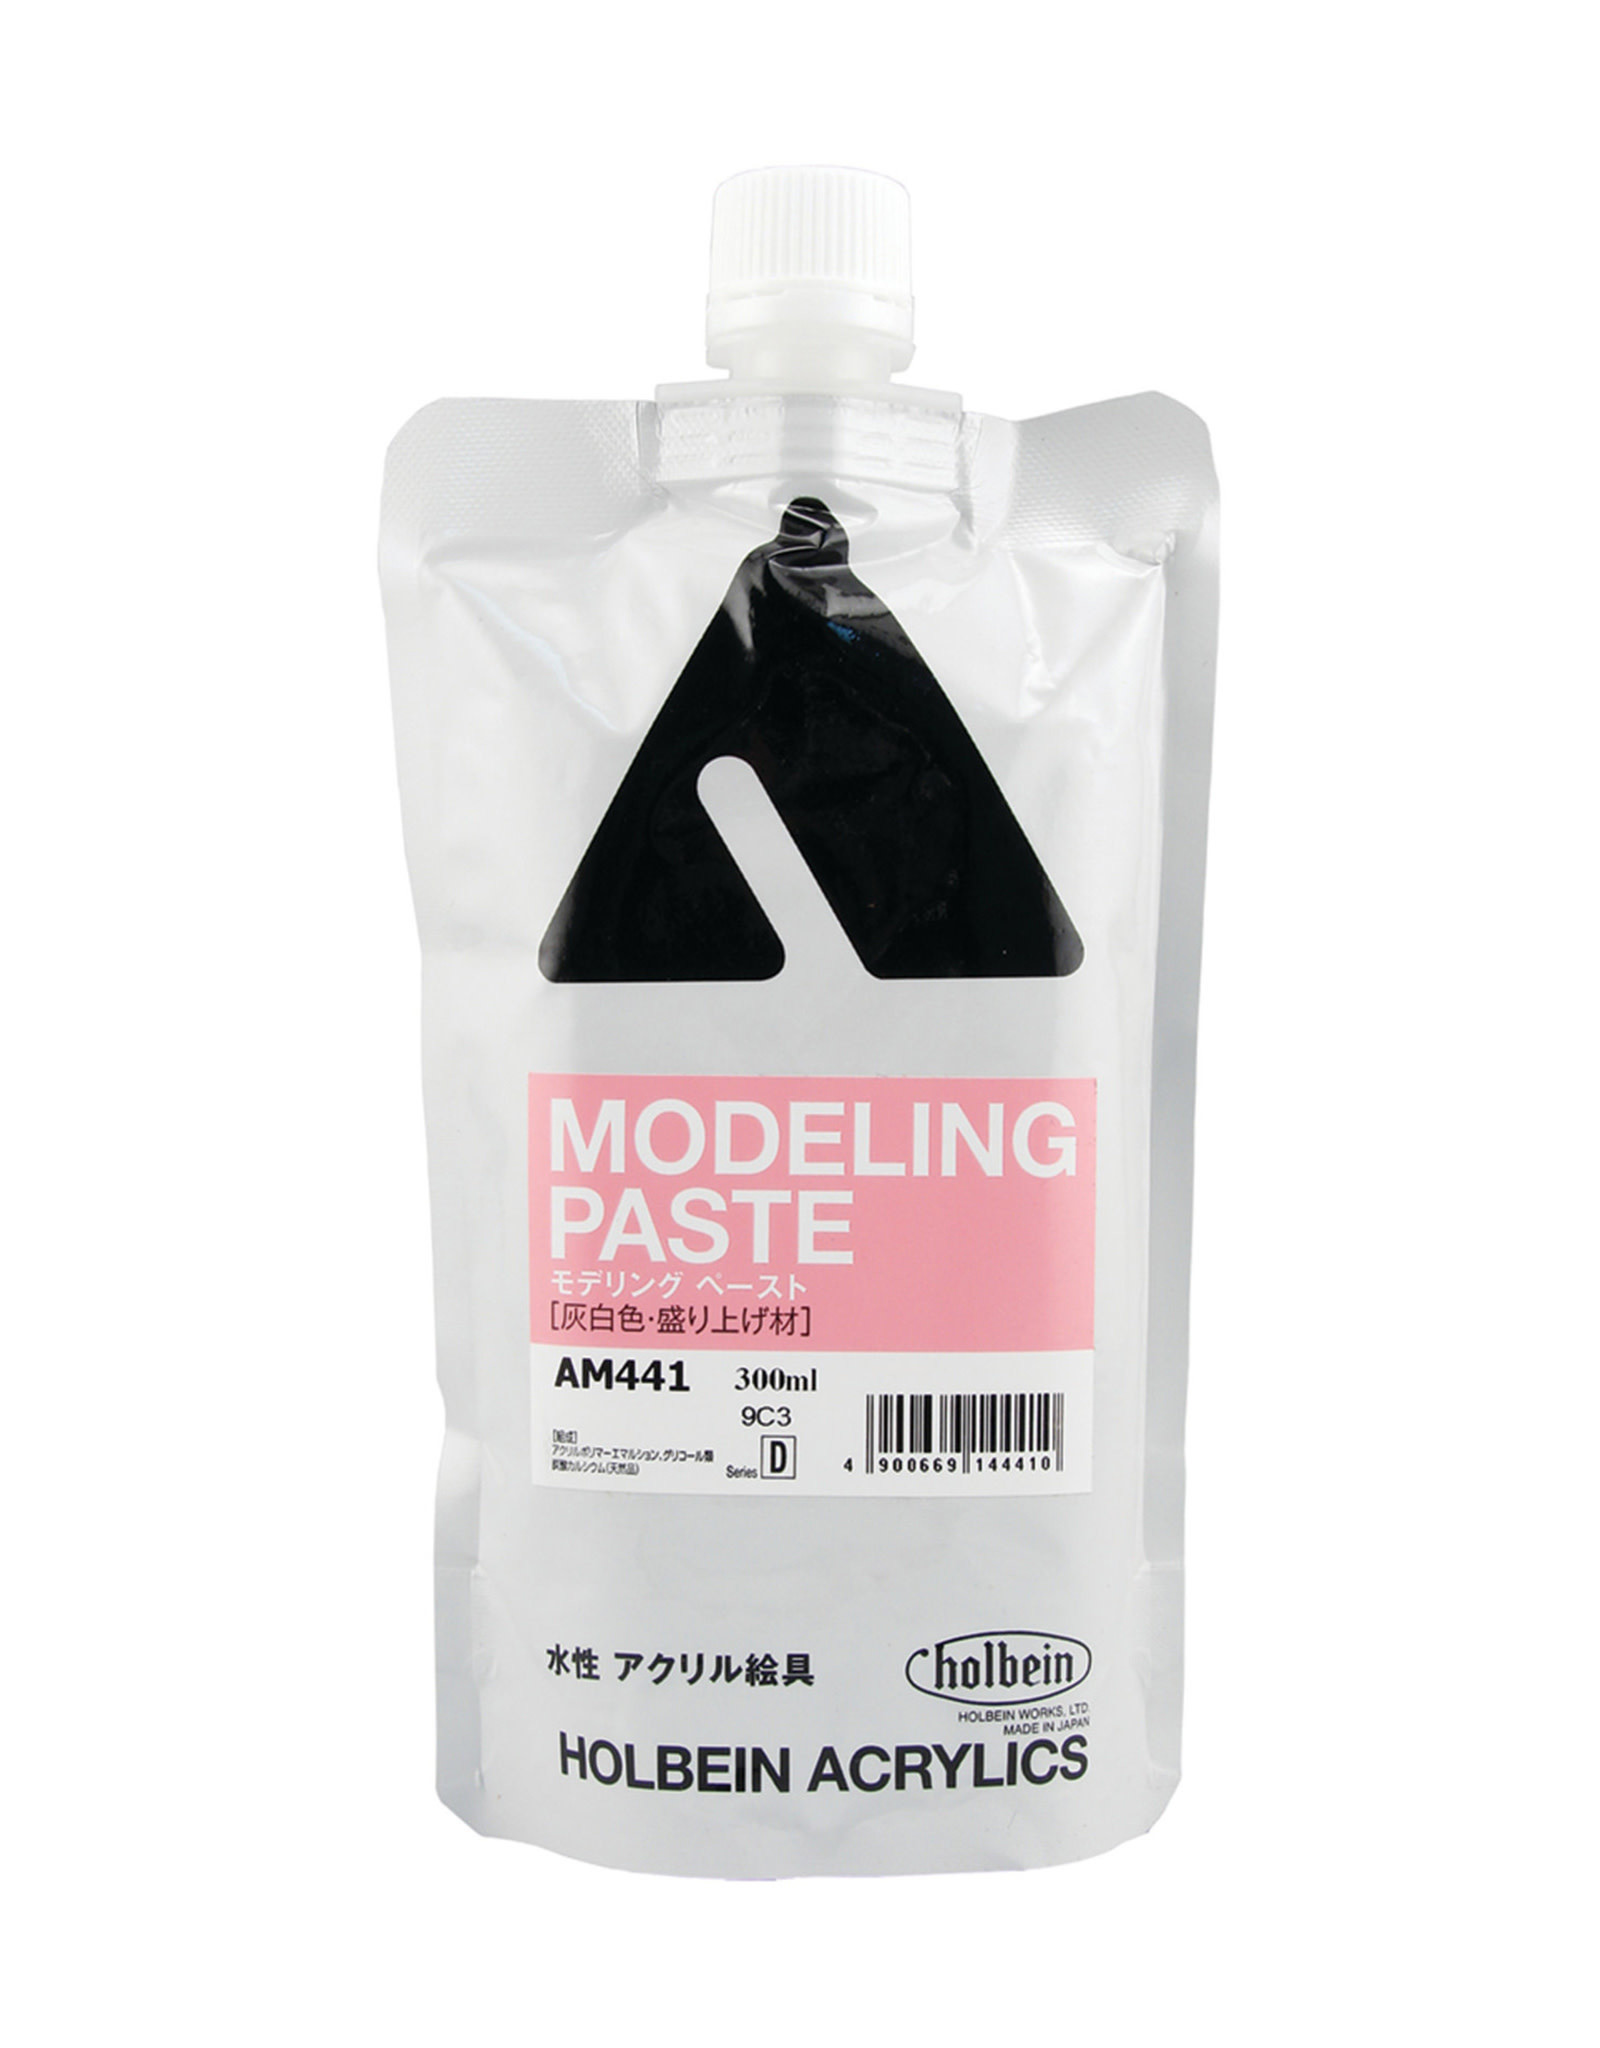 HOLBEIN Holbein Acrylic Modeling Paste 300ml